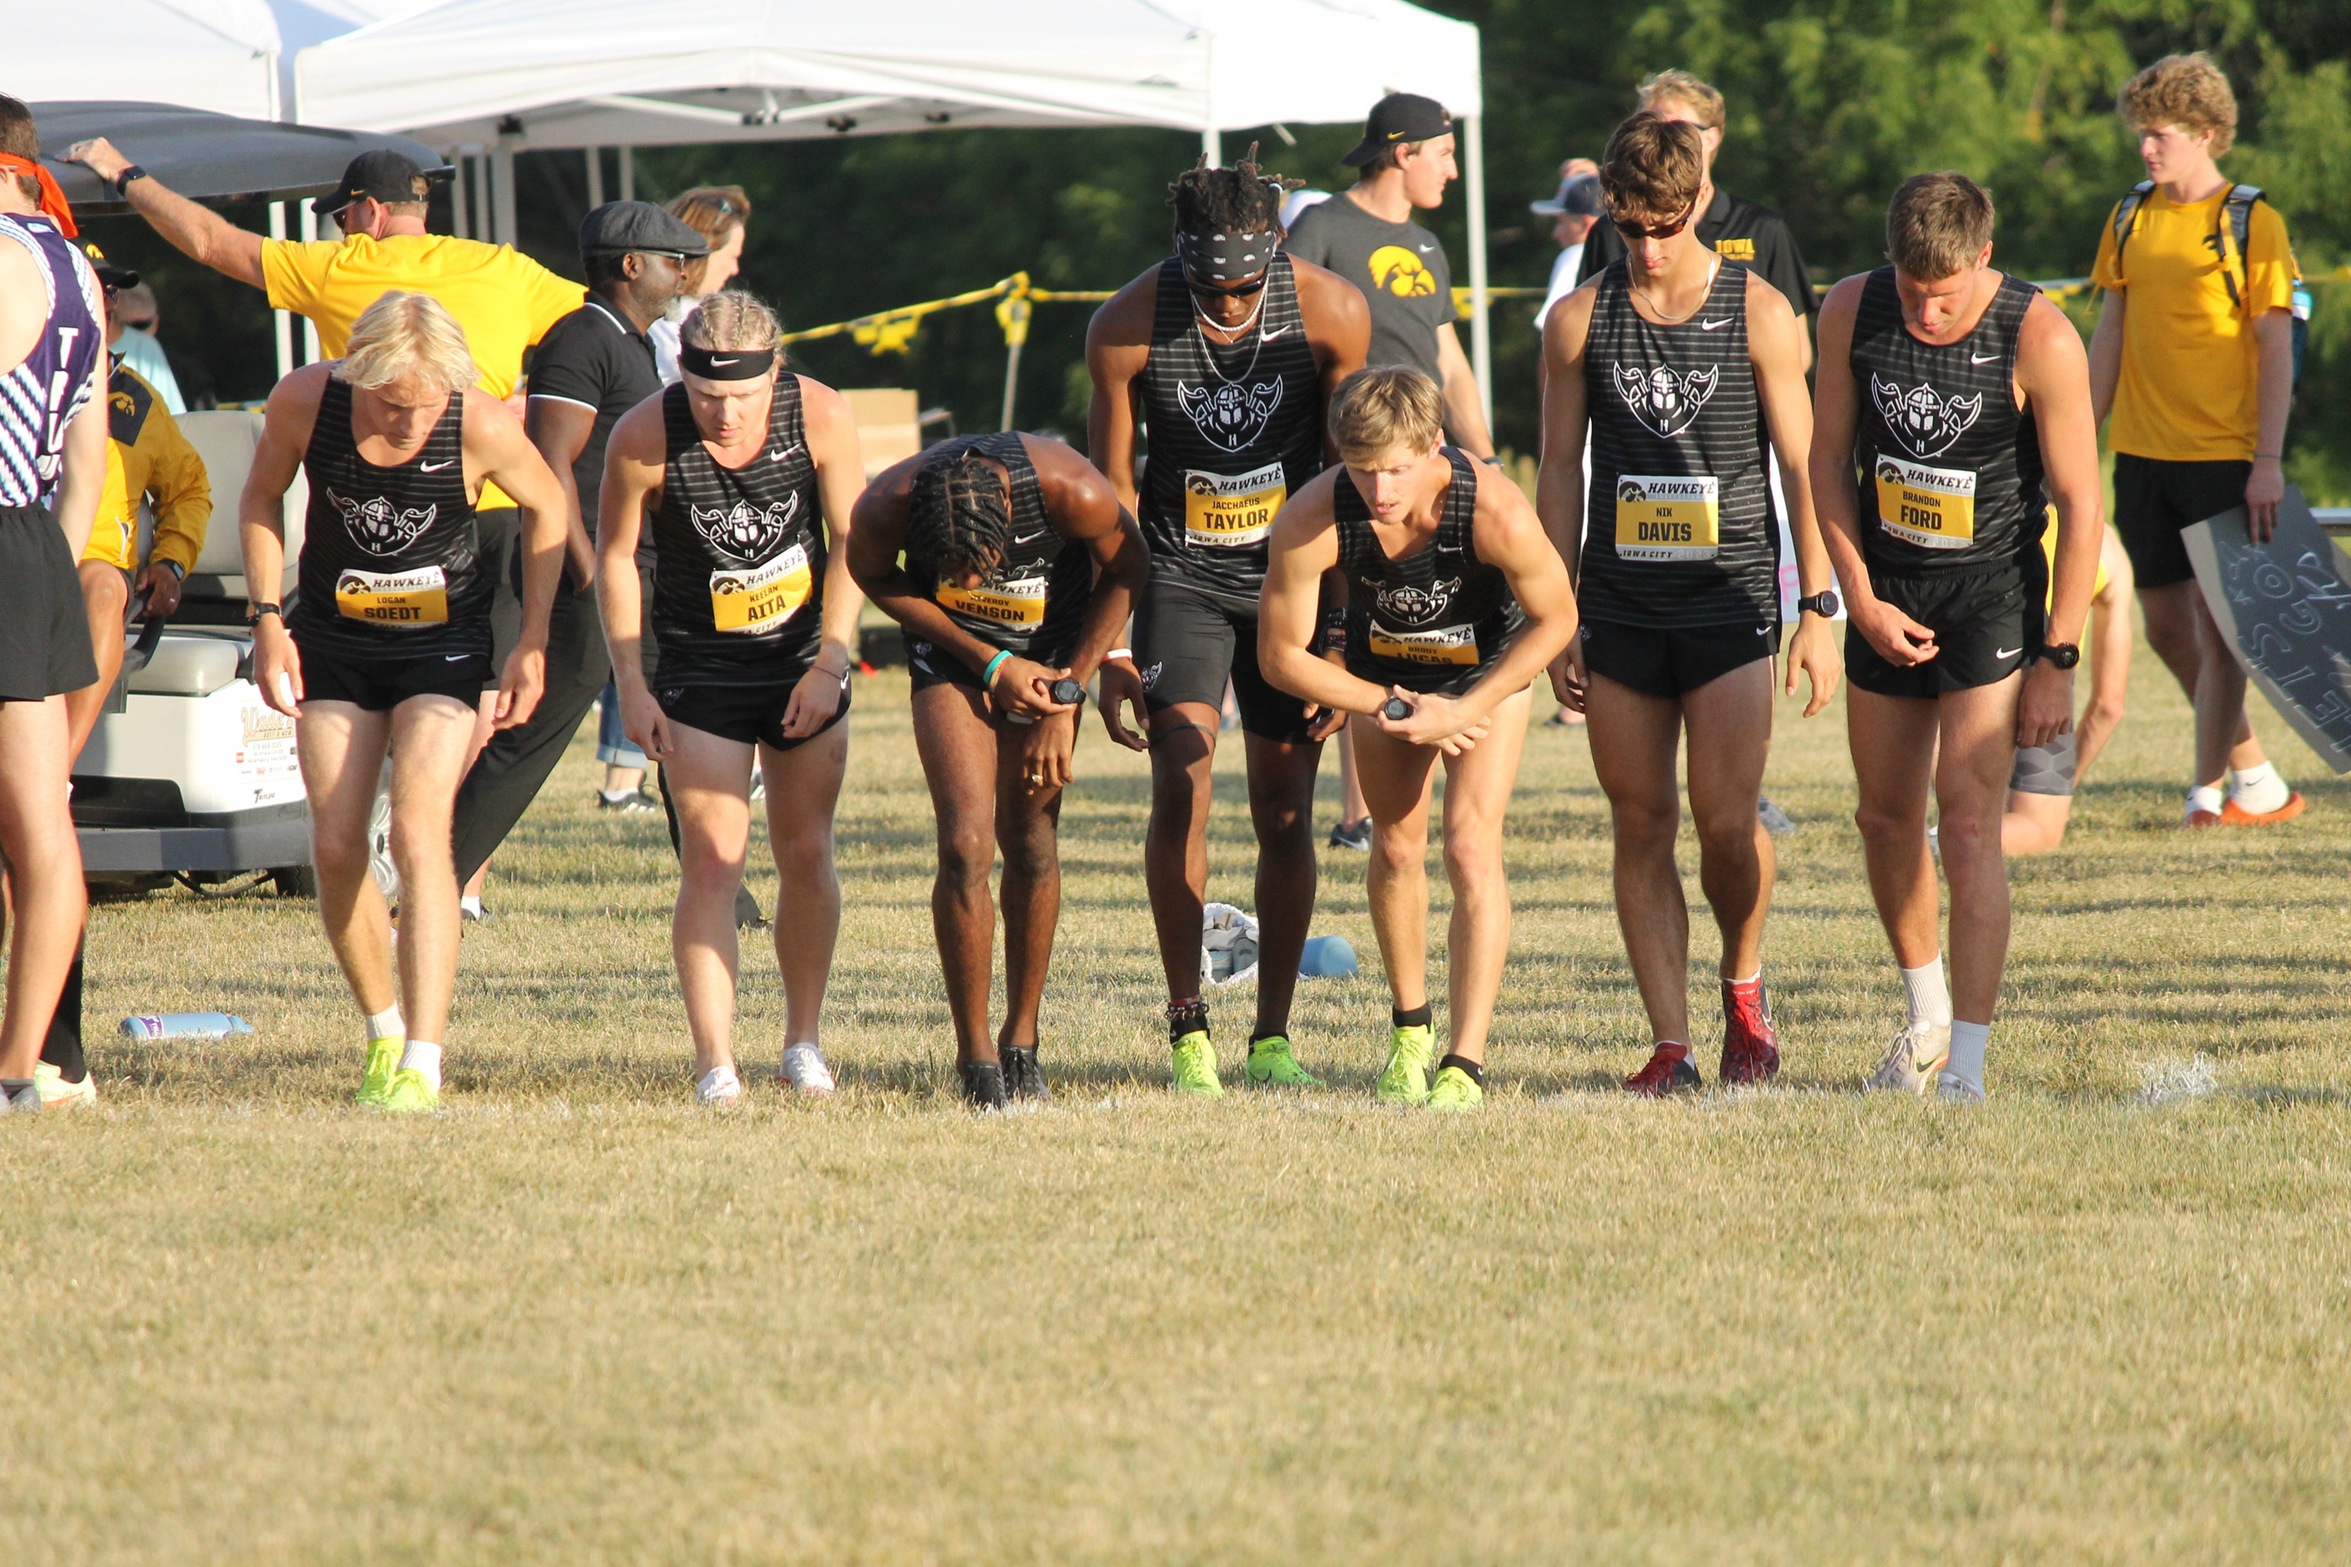 MEN'S XC CLIMBS TO NO. 7 IN THE NATION